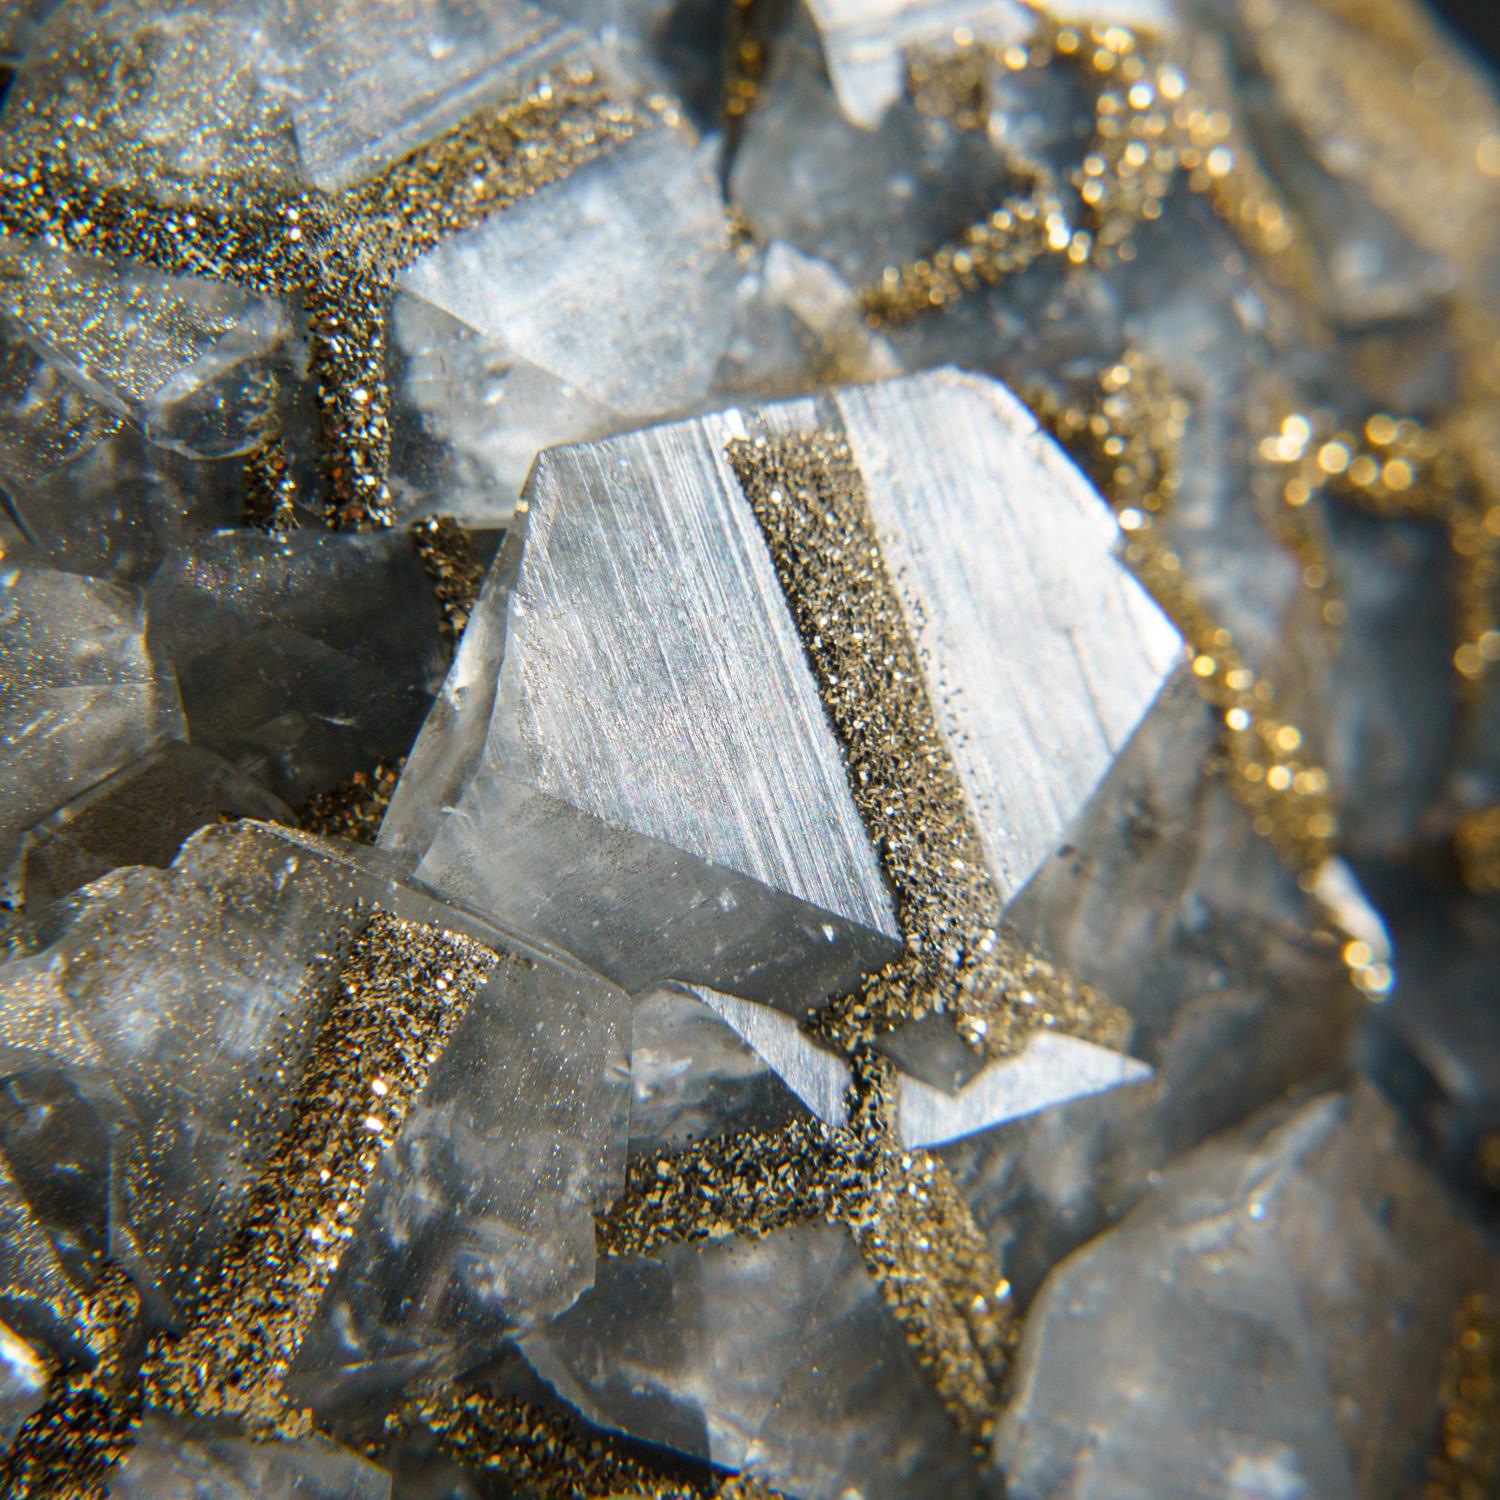 benz calcite with pyrite